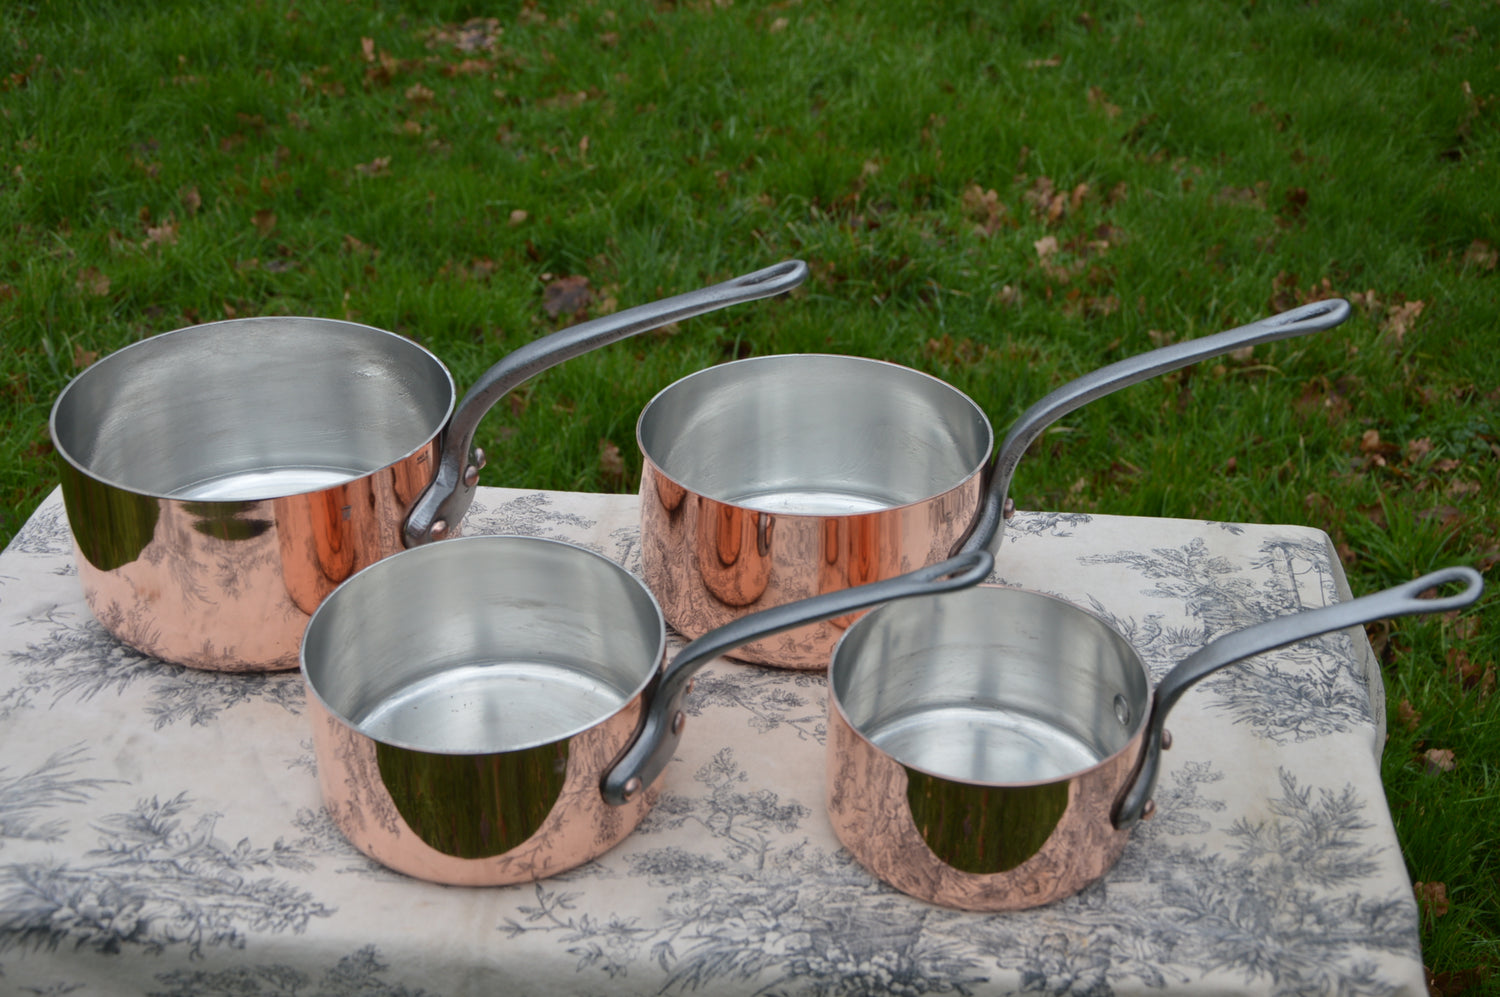 Vintage and Antique Copper Collection - FREE SHIPPING WORLDWIDE